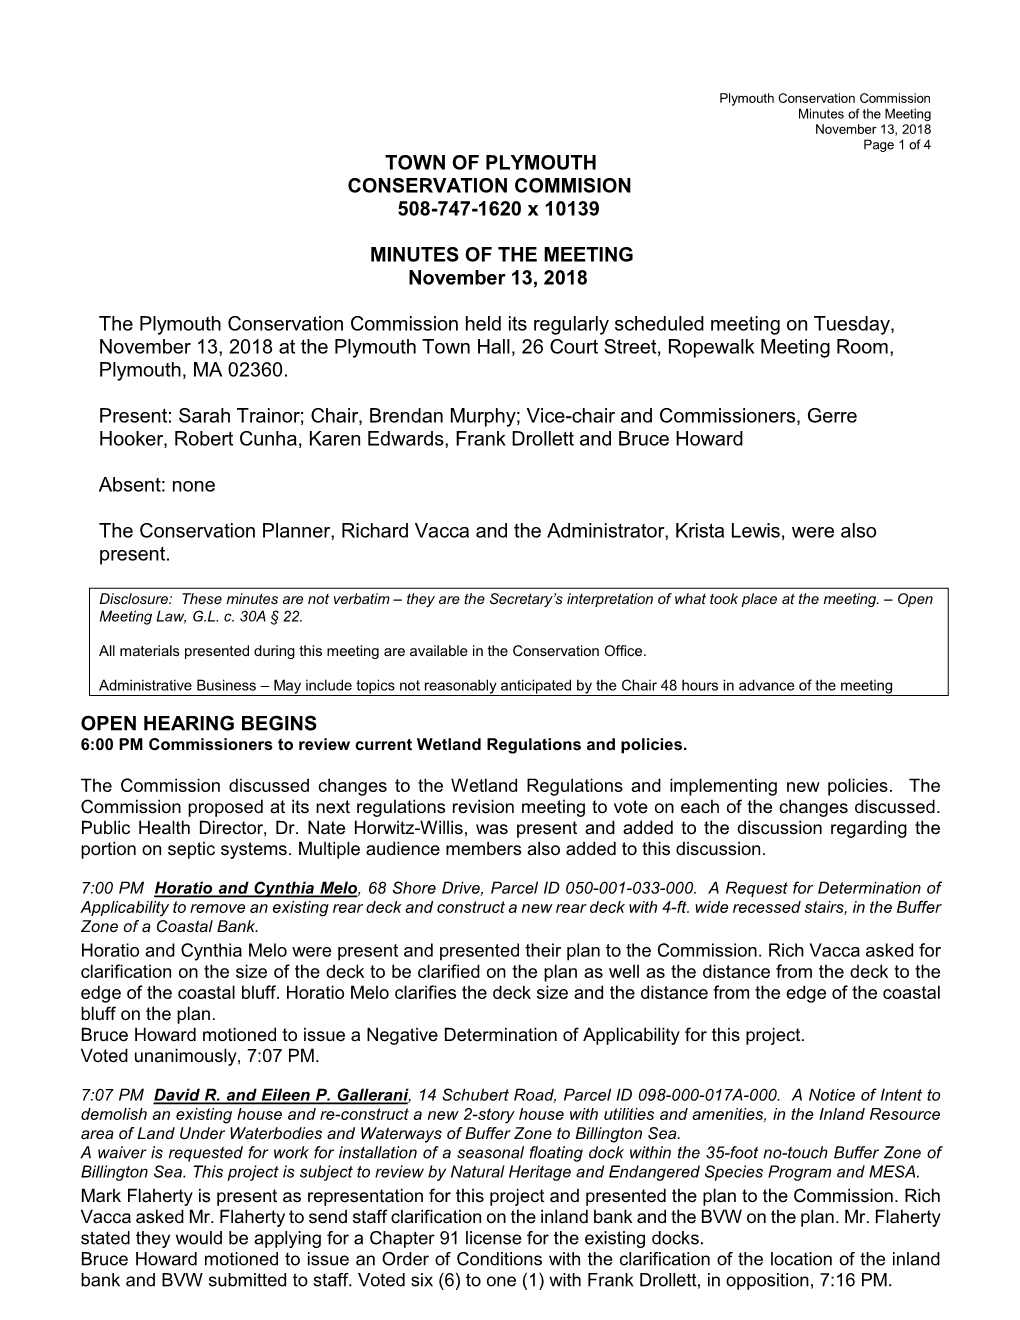 Conservation Commission Minutes of the Meeting November 13, 2018 Page 1 of 4 TOWN of PLYMOUTH CONSERVATION COMMISION 508-747-1620 X 10139